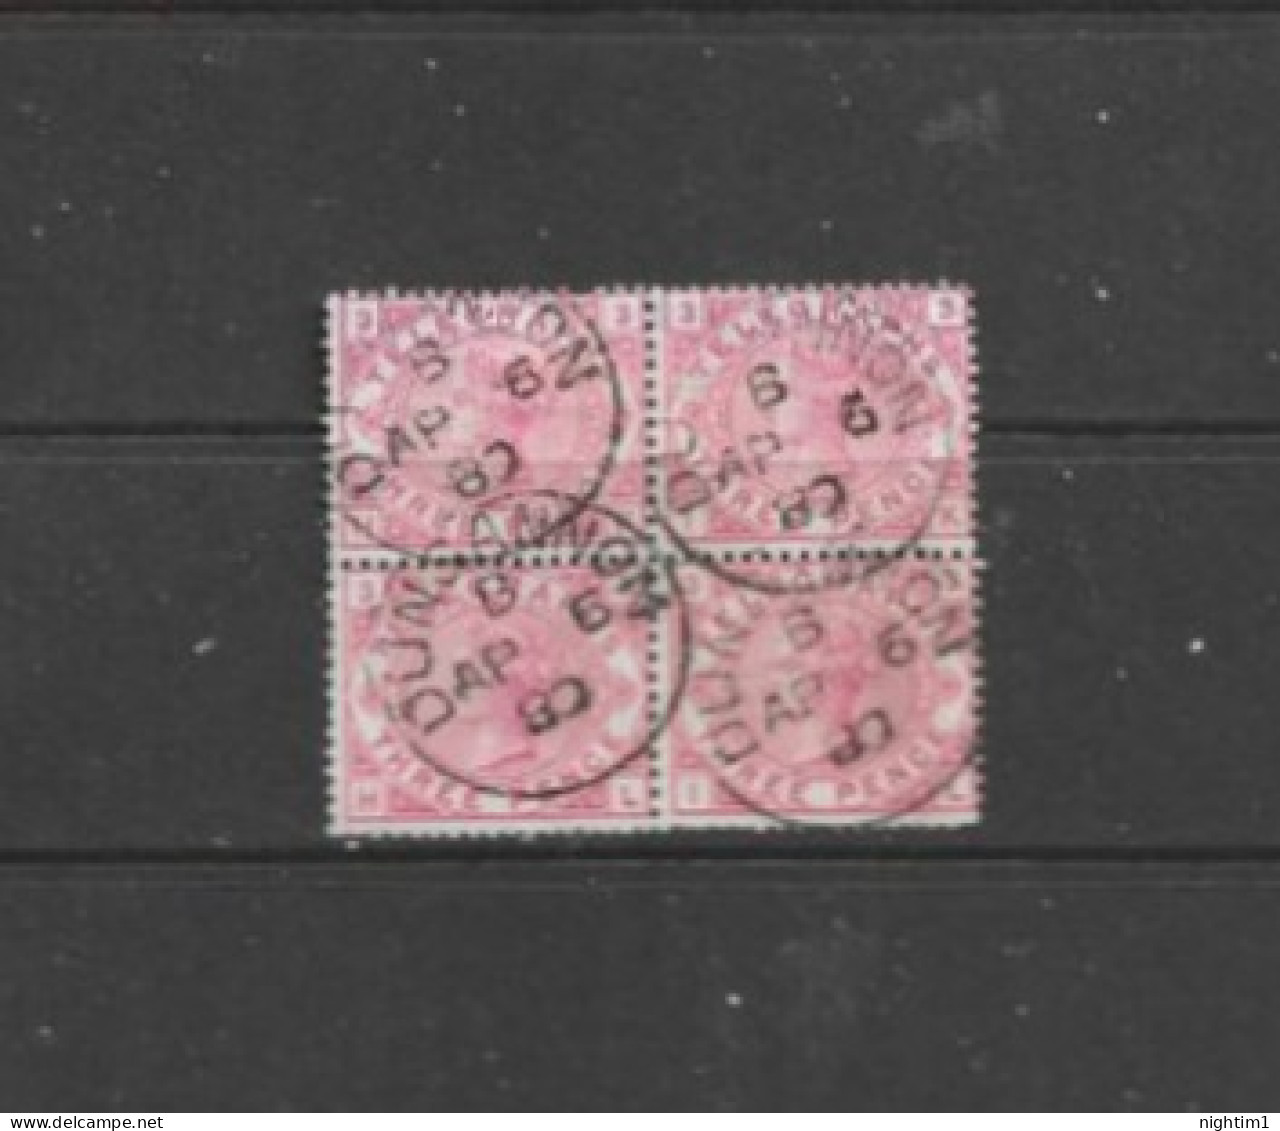 GREAT BRITAIN COLLECTION.  VICTORIA TELEGRAPH 3d STAMP. BLOCK OF 4.  USED. - Oblitérés